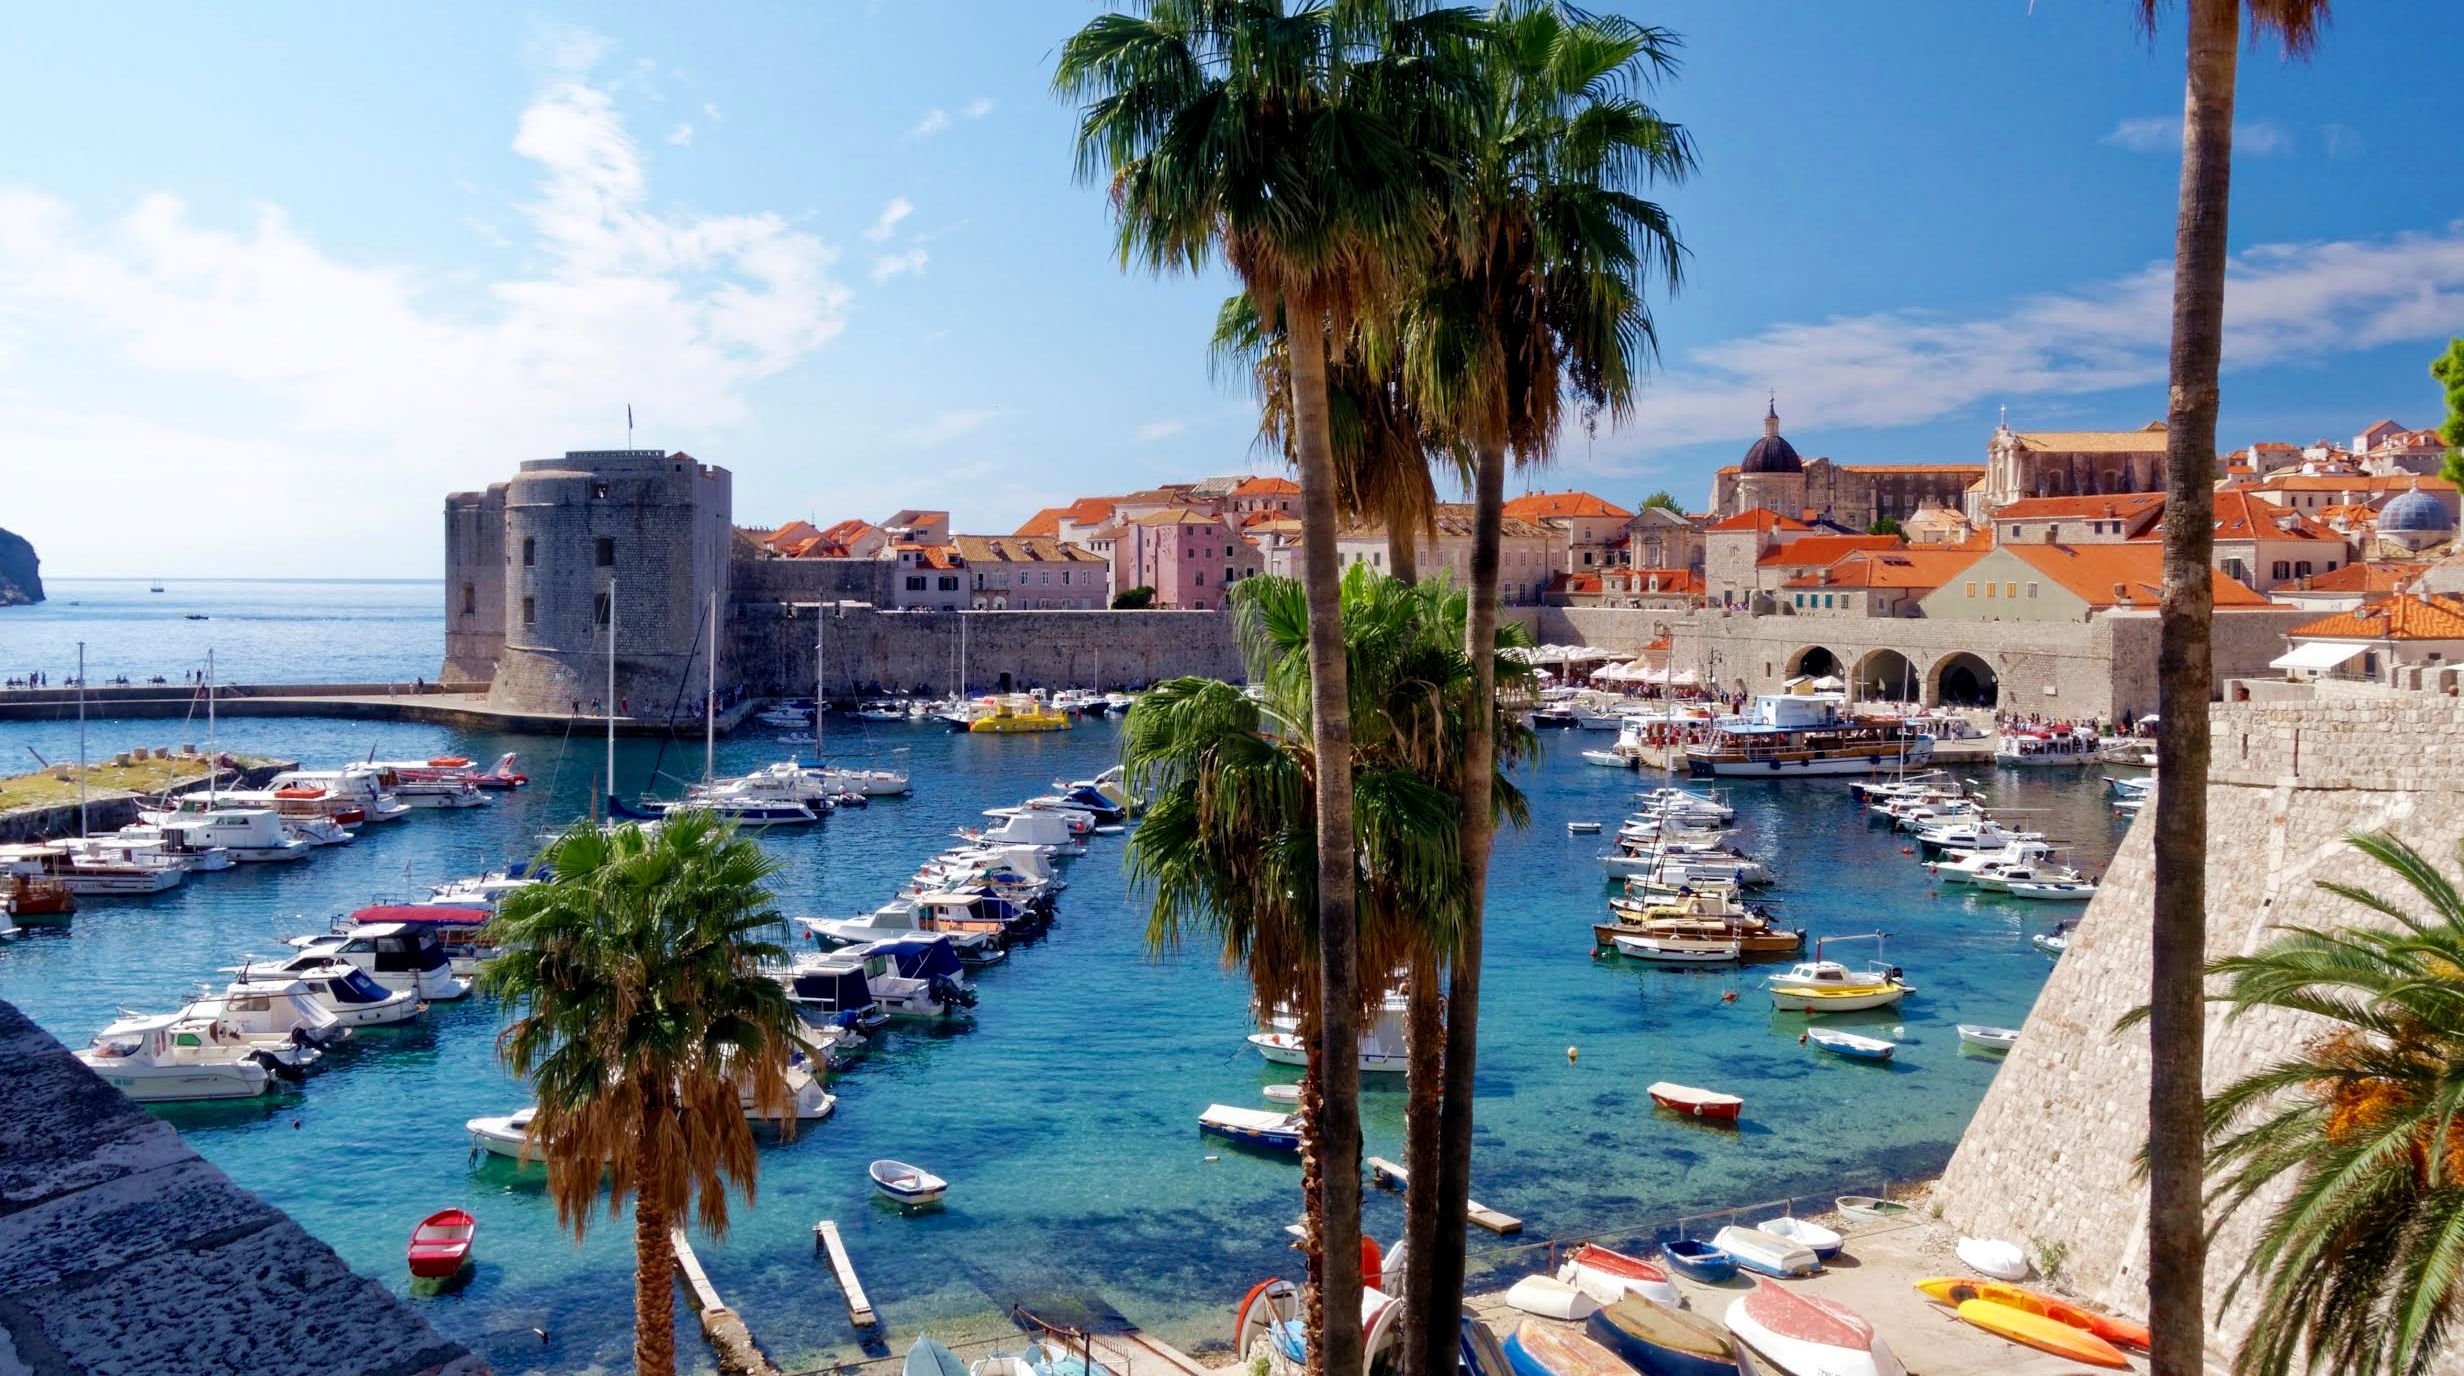 Dubrovnik & Istria on New York Times’ 52 Places to Go in 2017 List